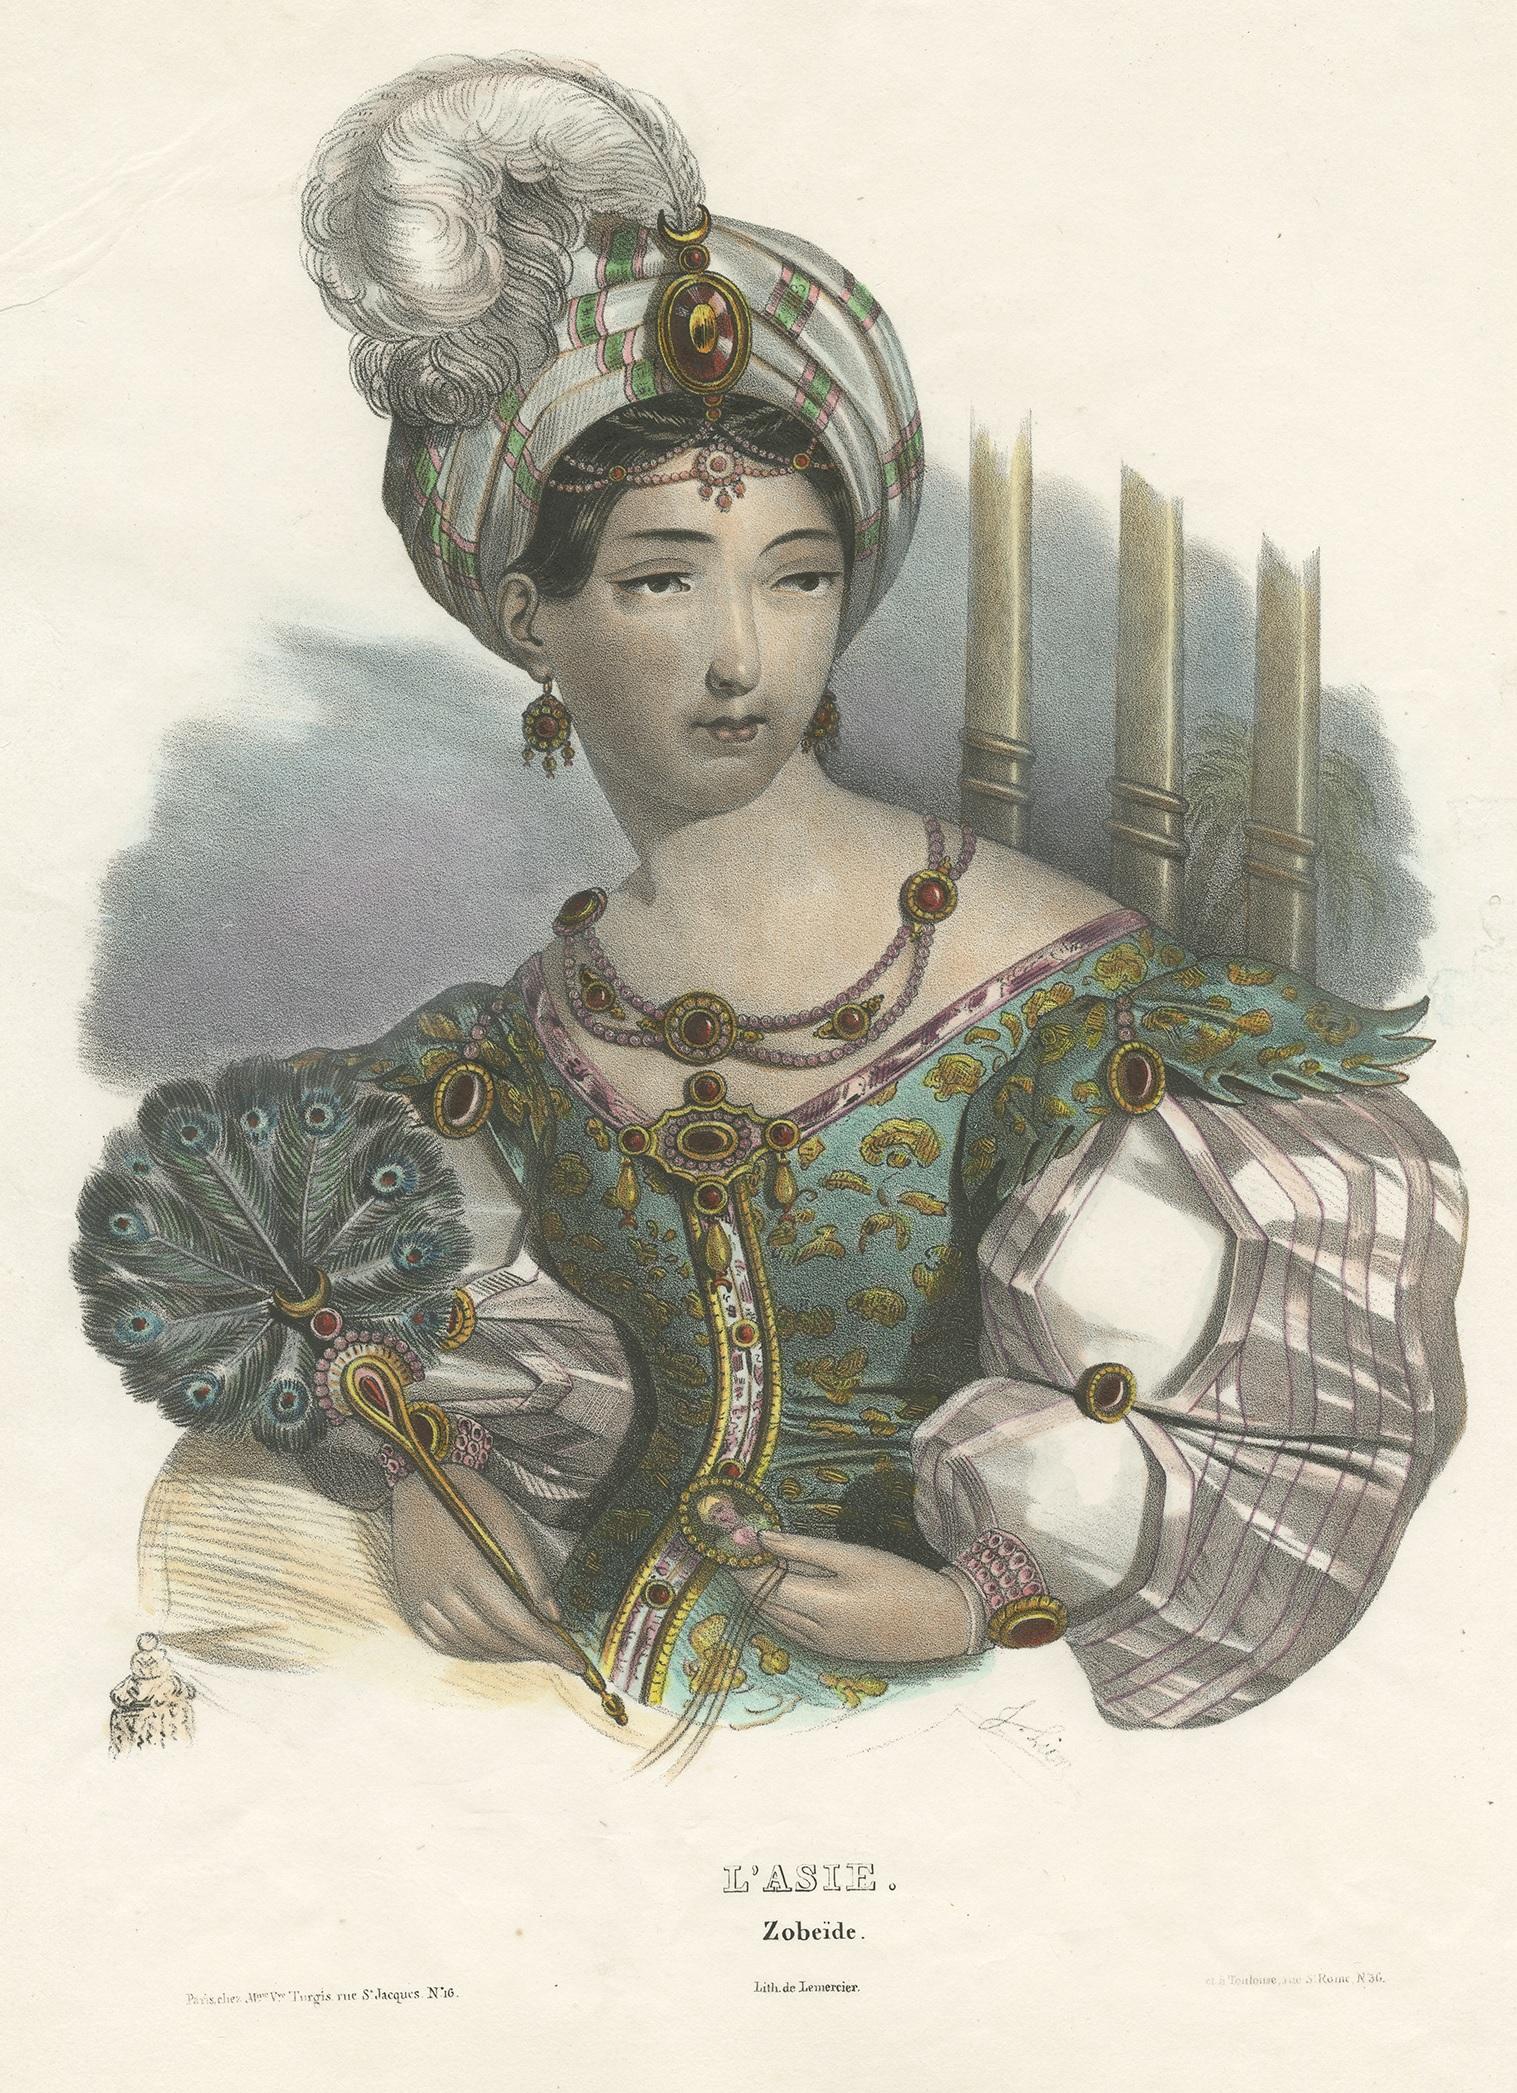 Antique print titled 'L'Asie - Zobeïde'. Beautiful lithograph of an Asian costume. Lithographed by Lemercier, circa 1840.